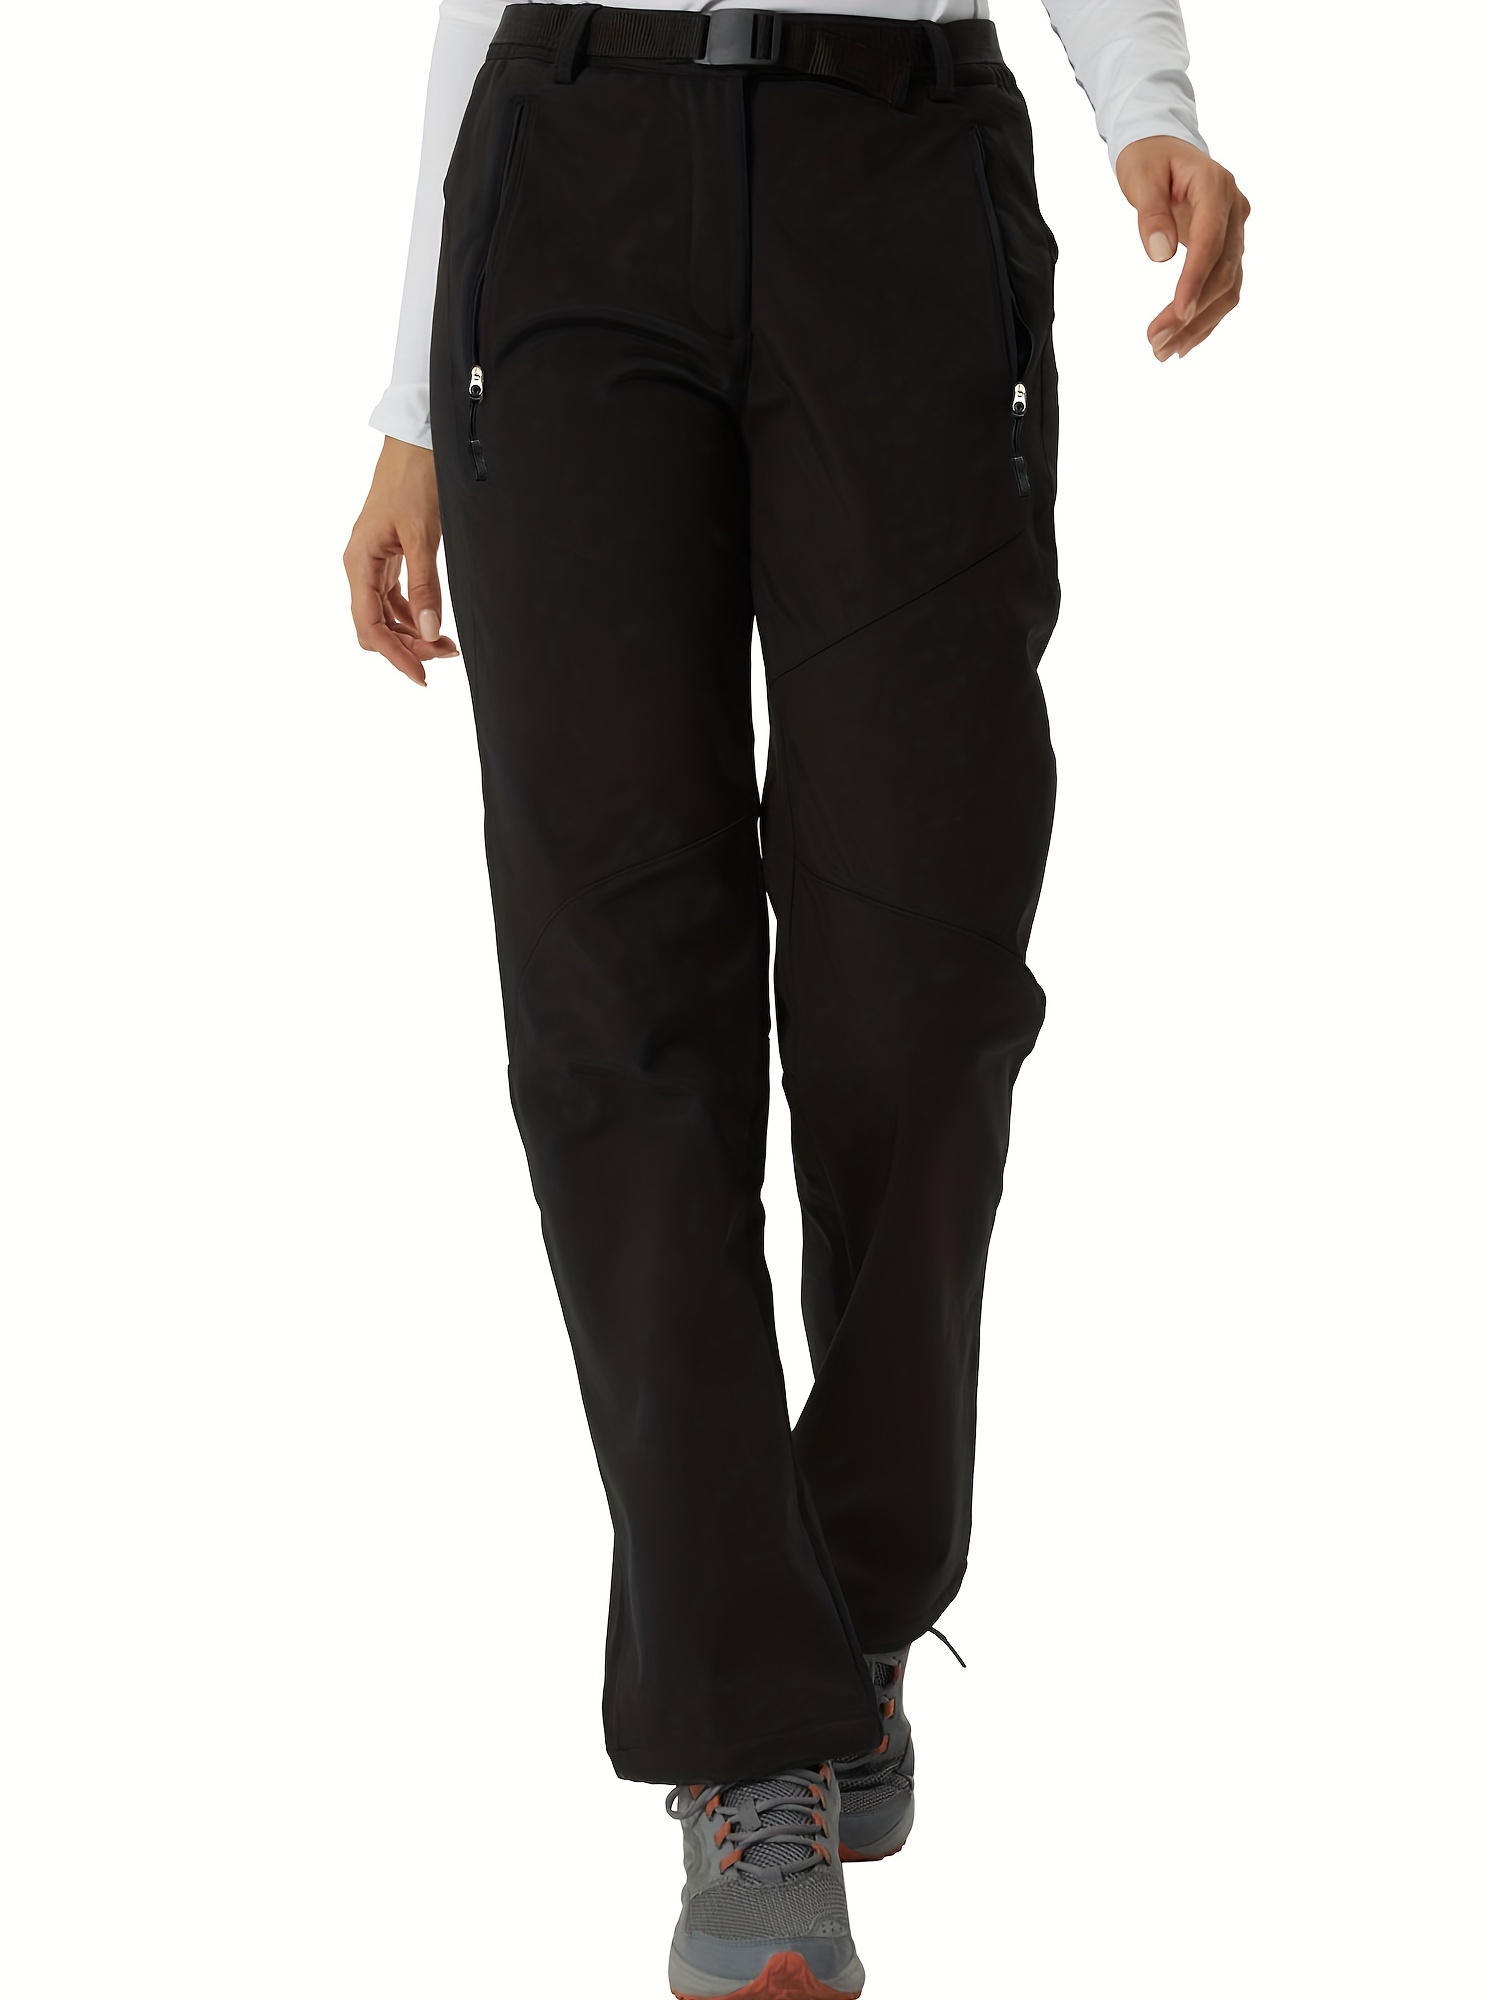 * Waterproof Fleece-Lined Pants for Outdoor Activities - Ideal for Hiking,  Climbing, Motorcycle Riding, and Skiing